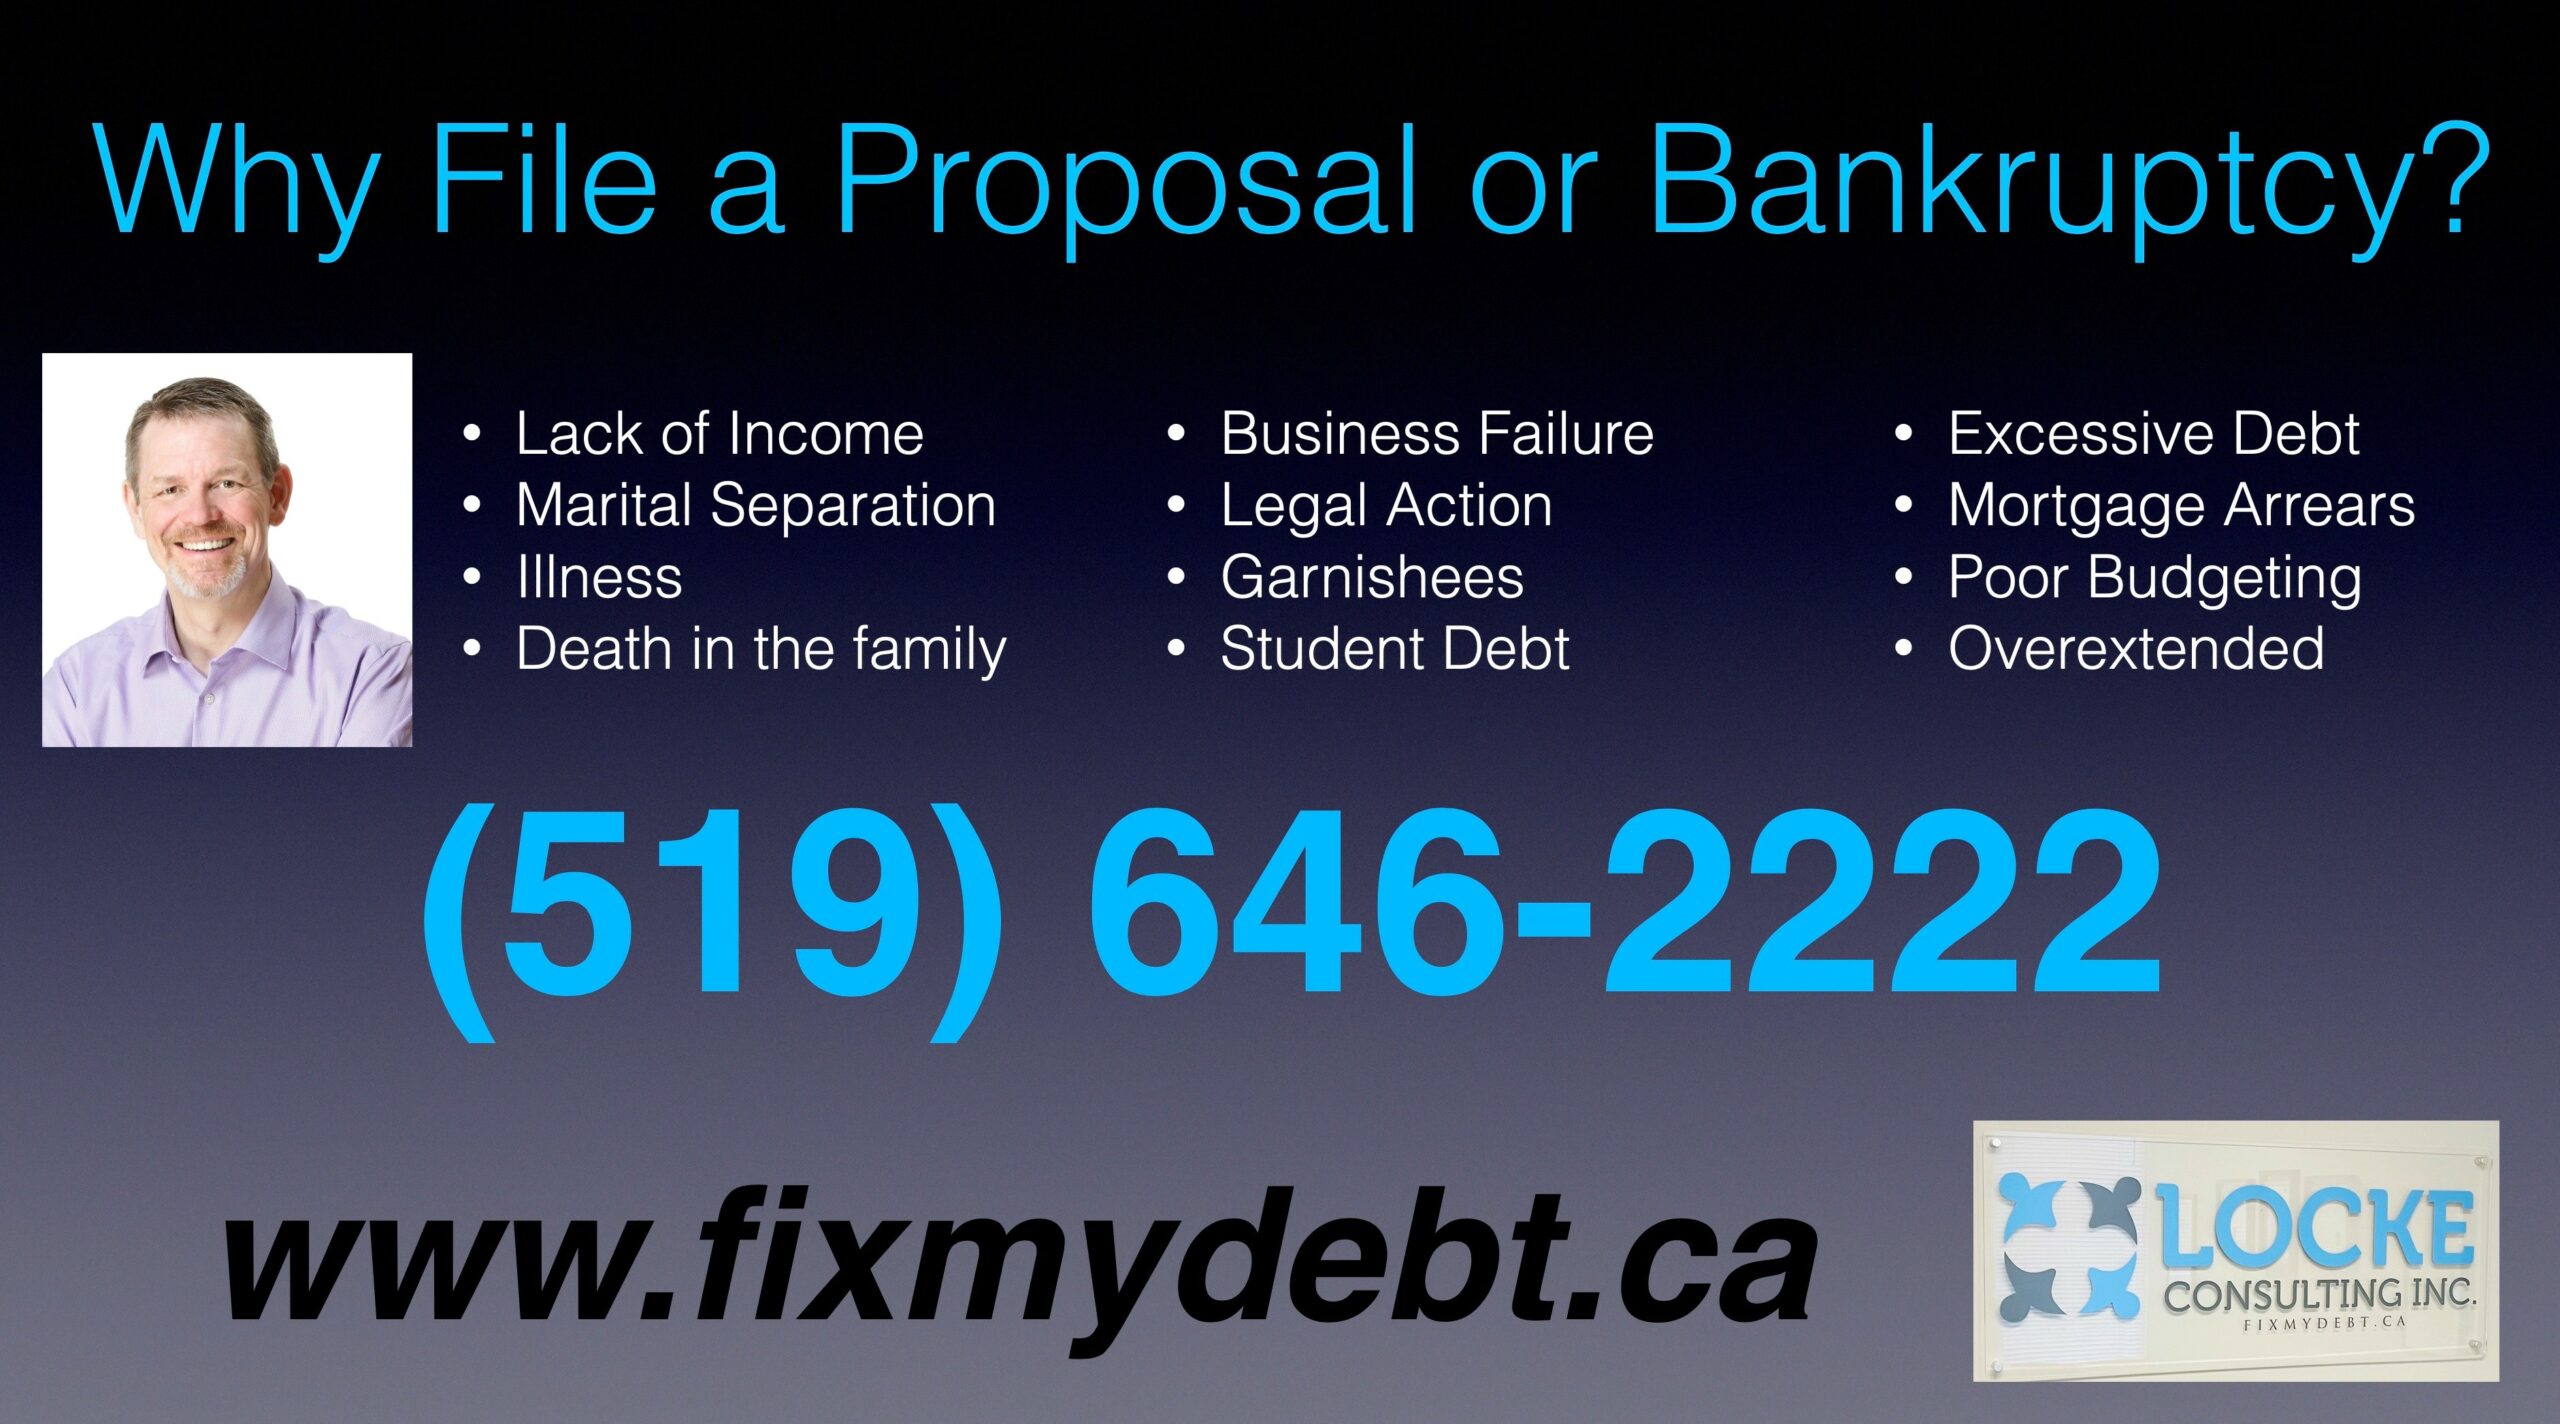 Why file a proposal or bankruptcy